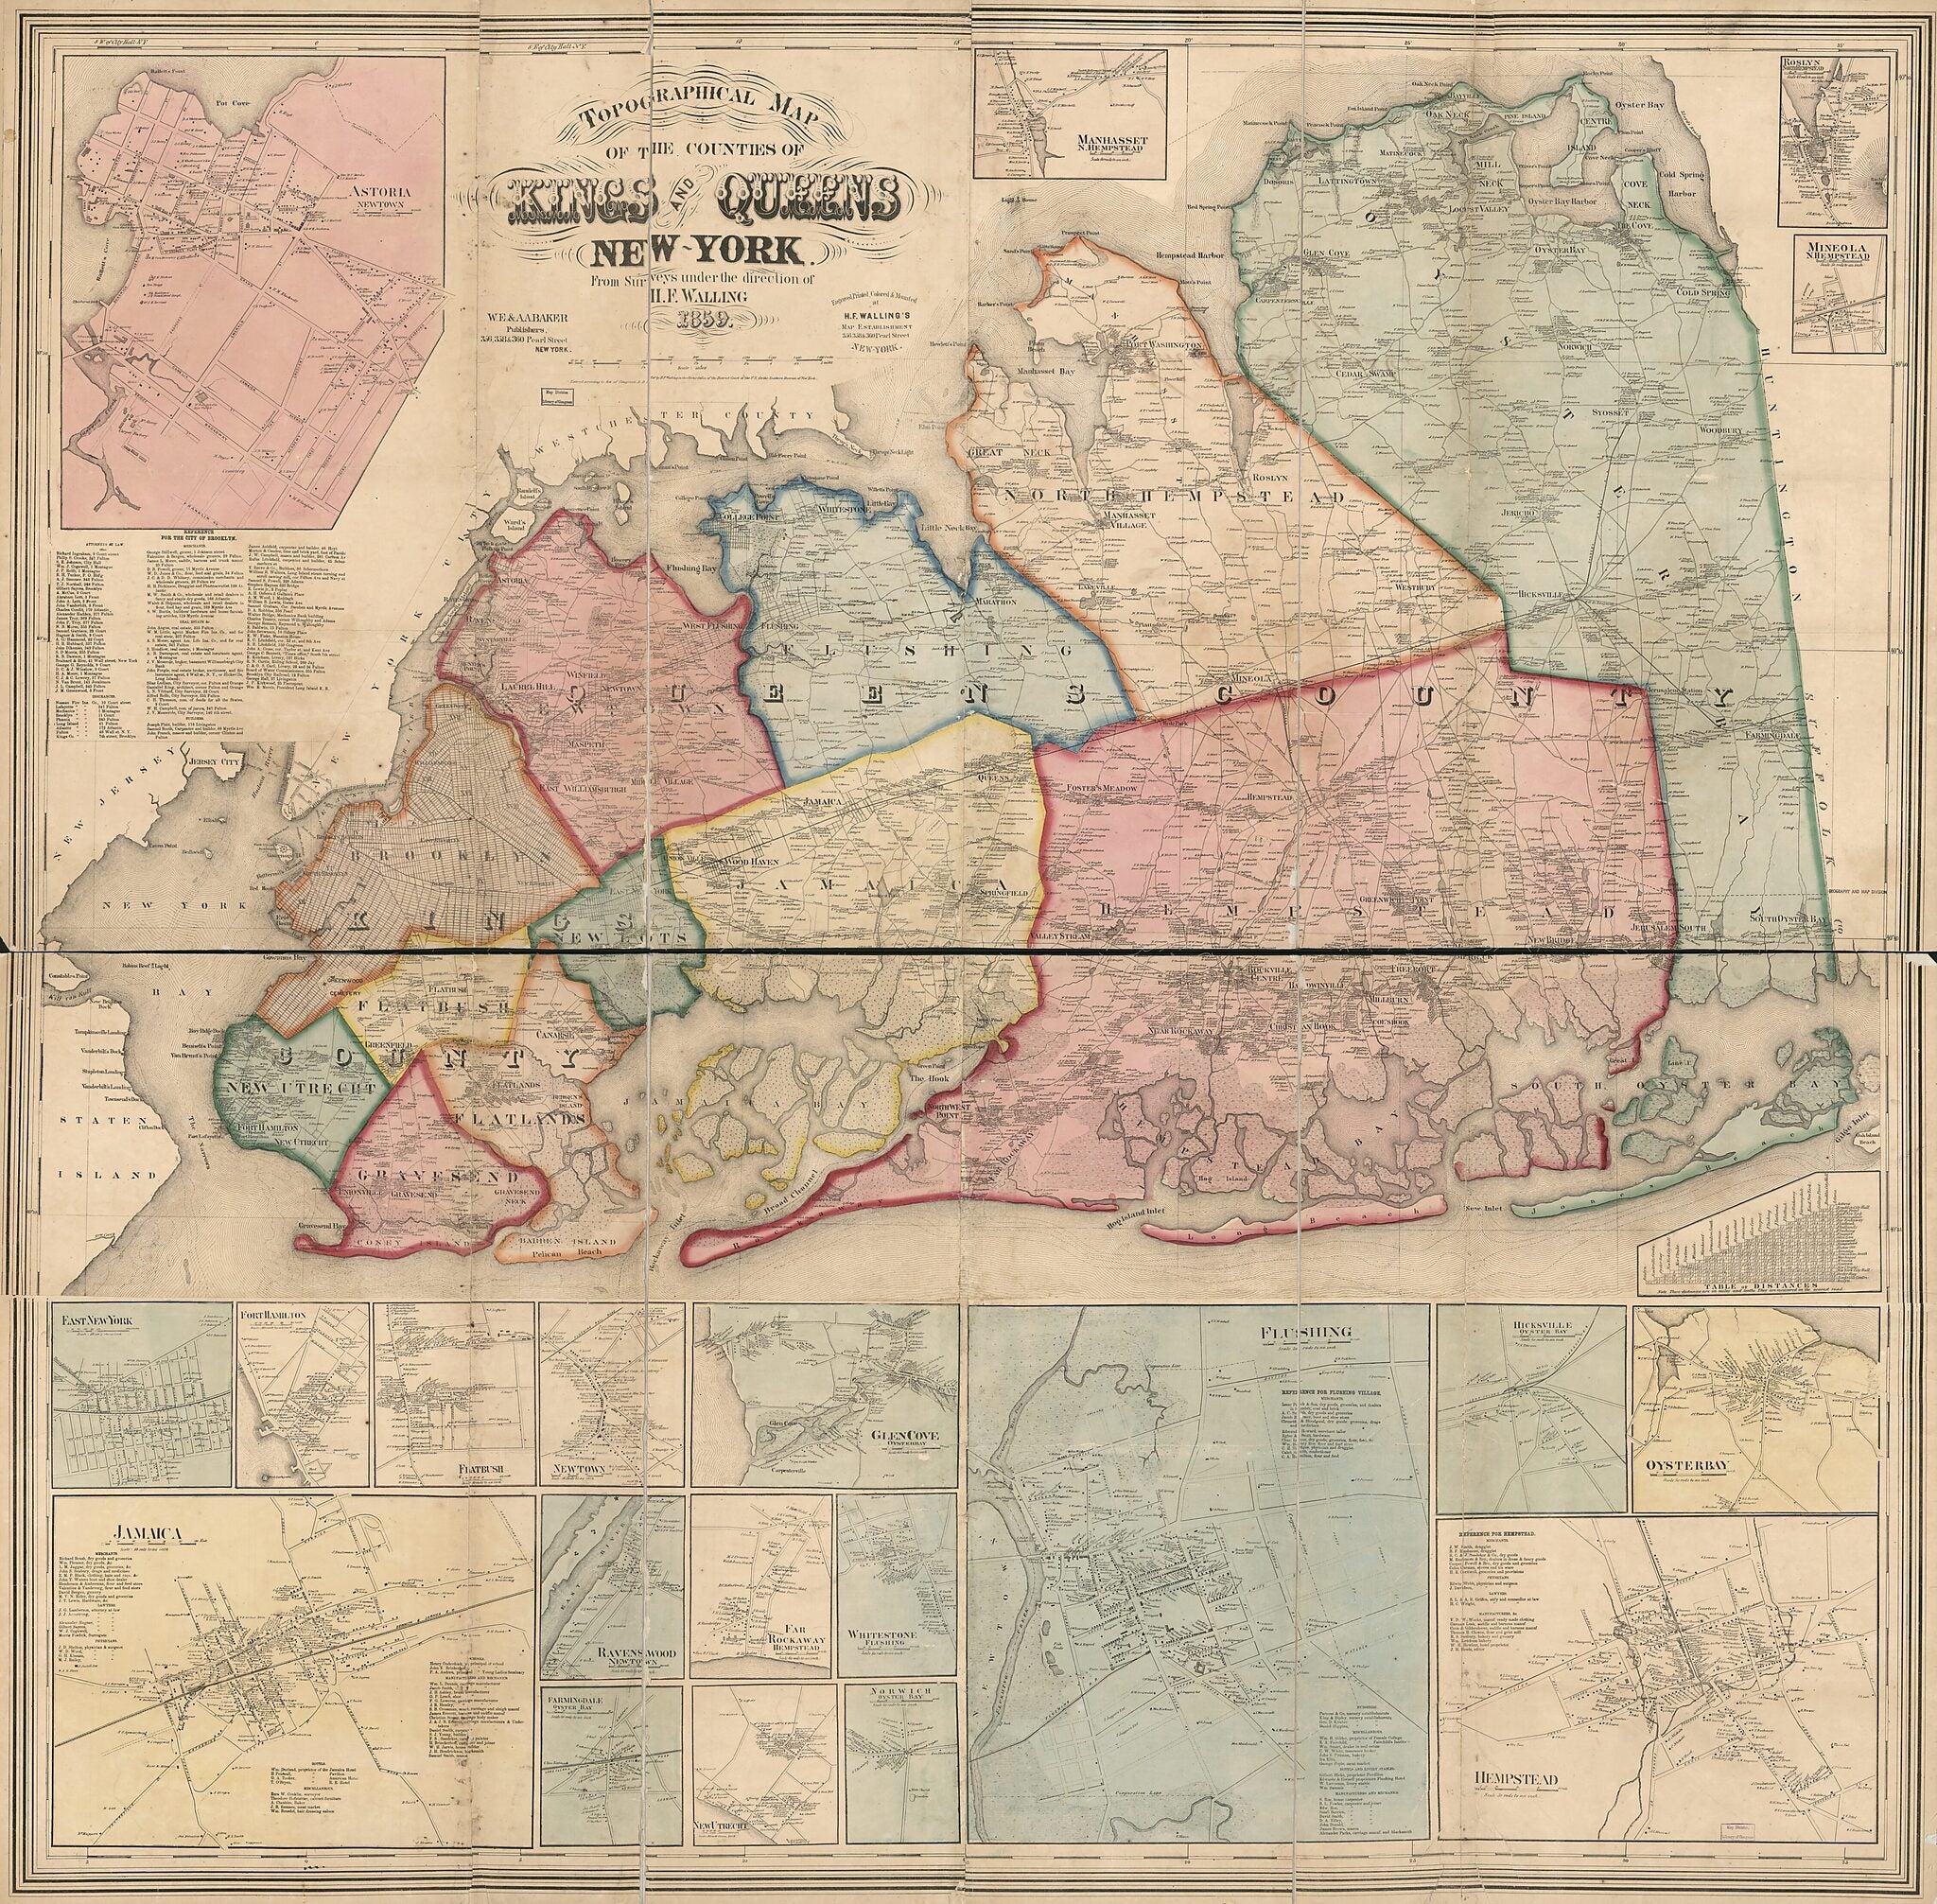 This old map of Topographical Map of the Counties of Kings and Queens, New York from 1859 was created by  H.F. Walling&